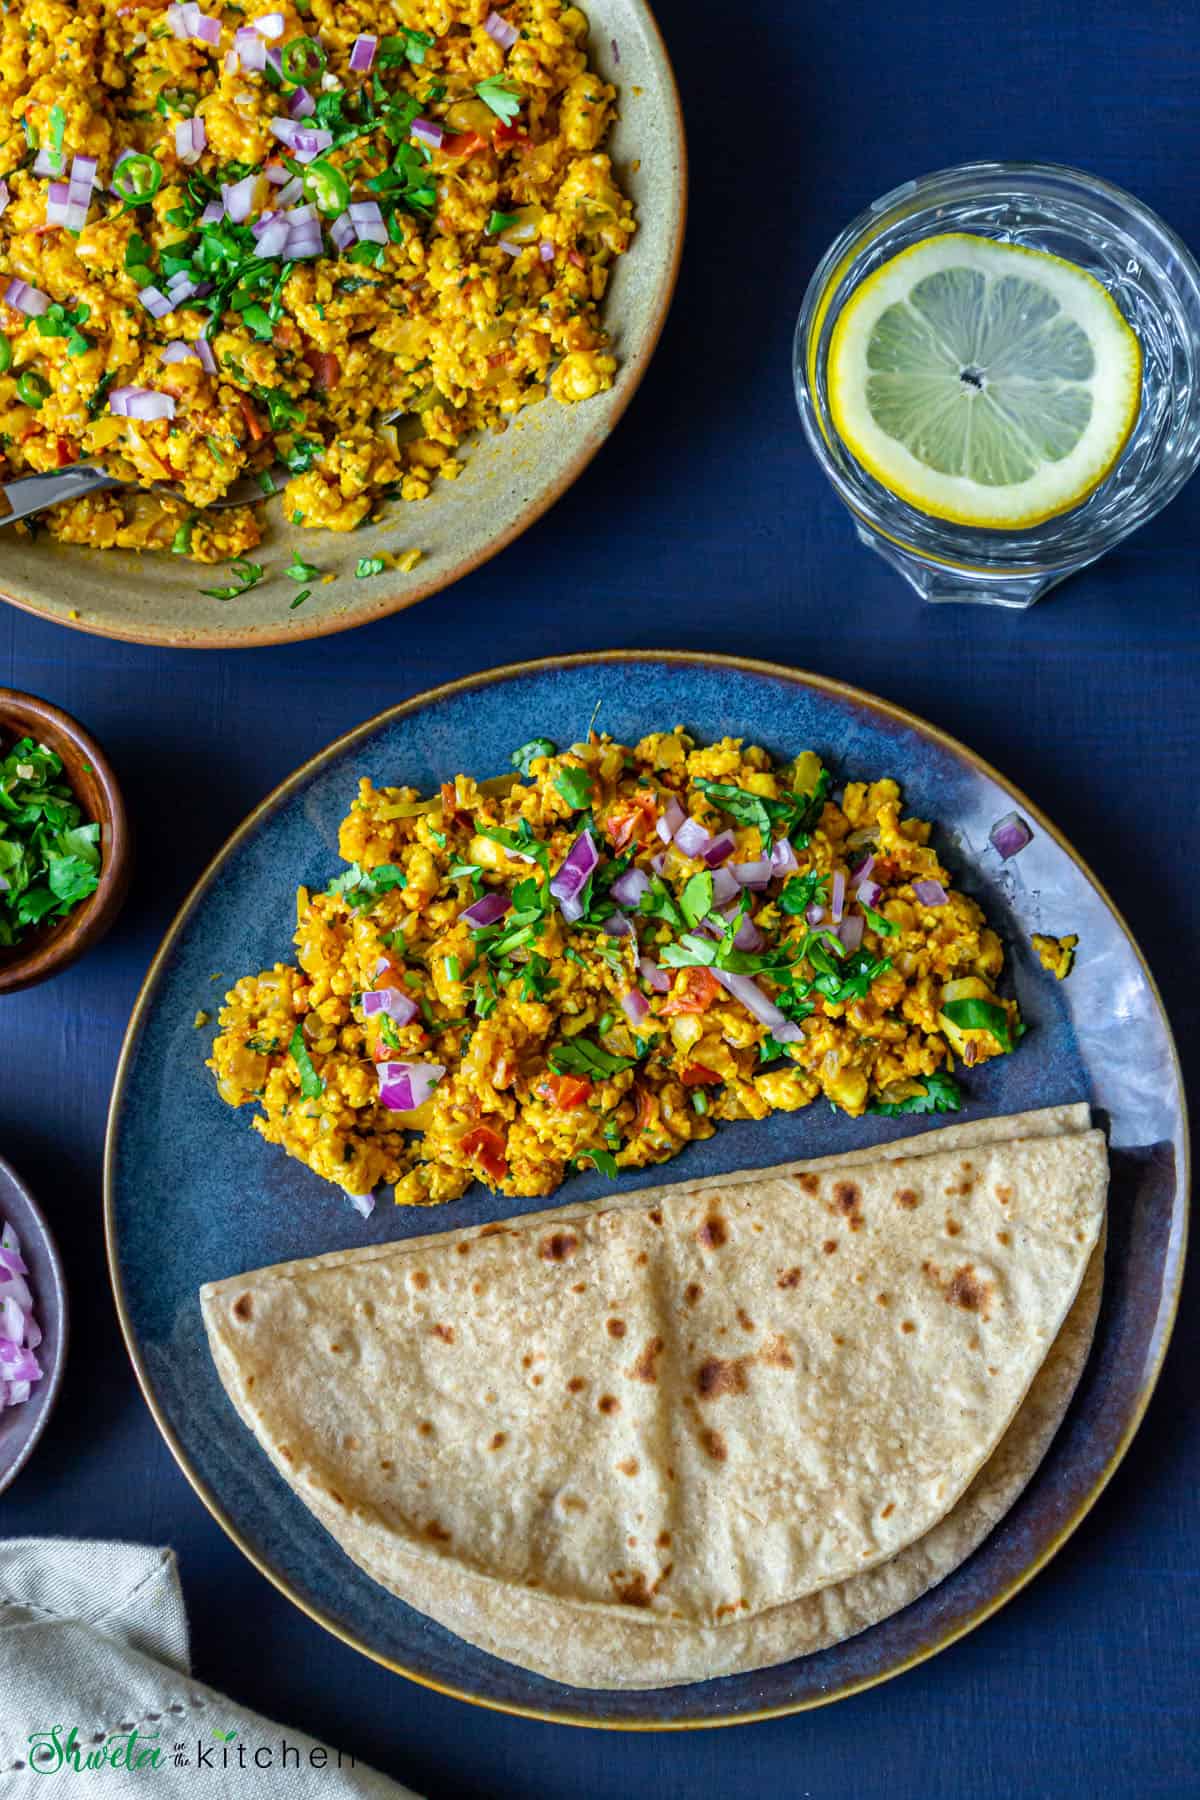 Paneer bhurji served on a blue plate with roti next to a glass of water with a slice of lemon